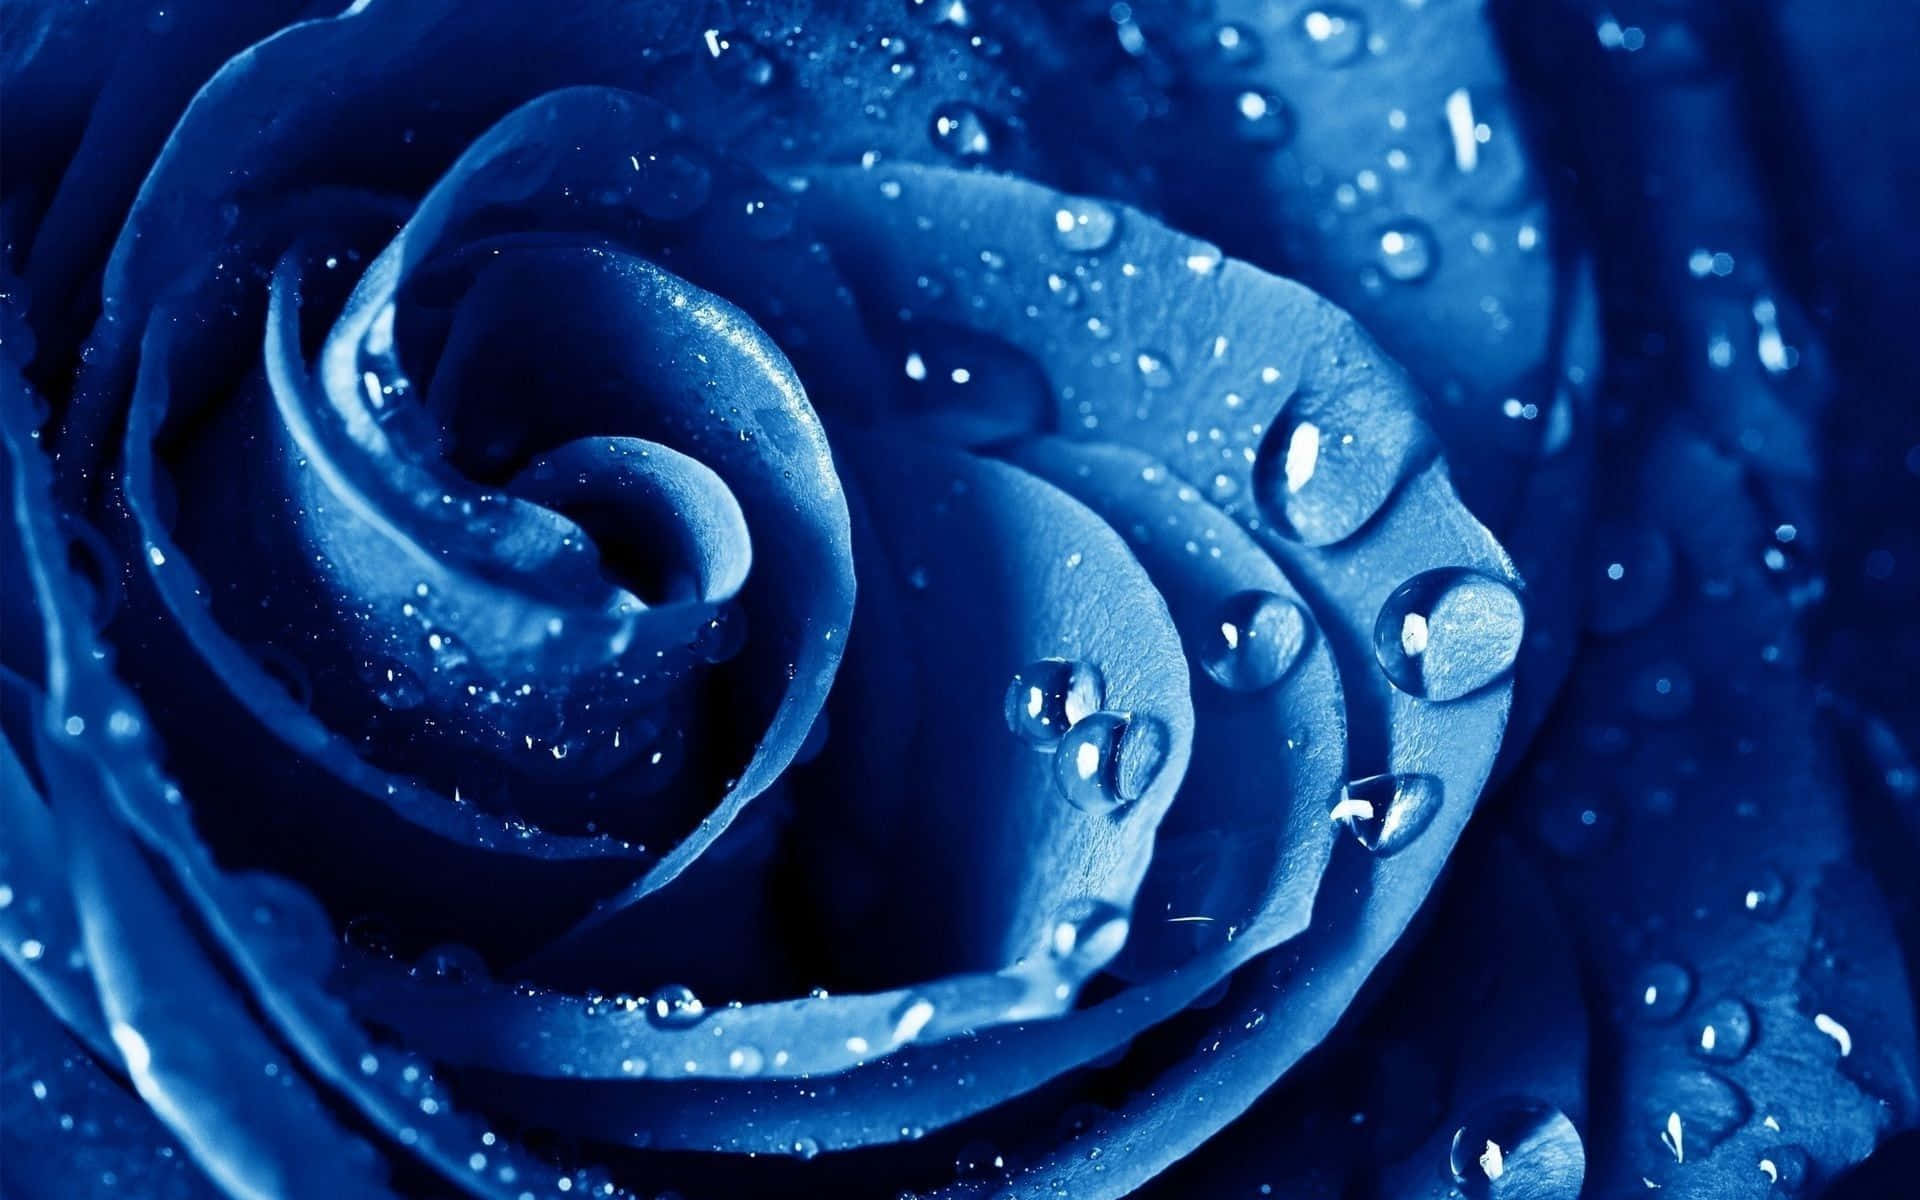 A beautiful blue rose surrounded by lush green foliage. Wallpaper